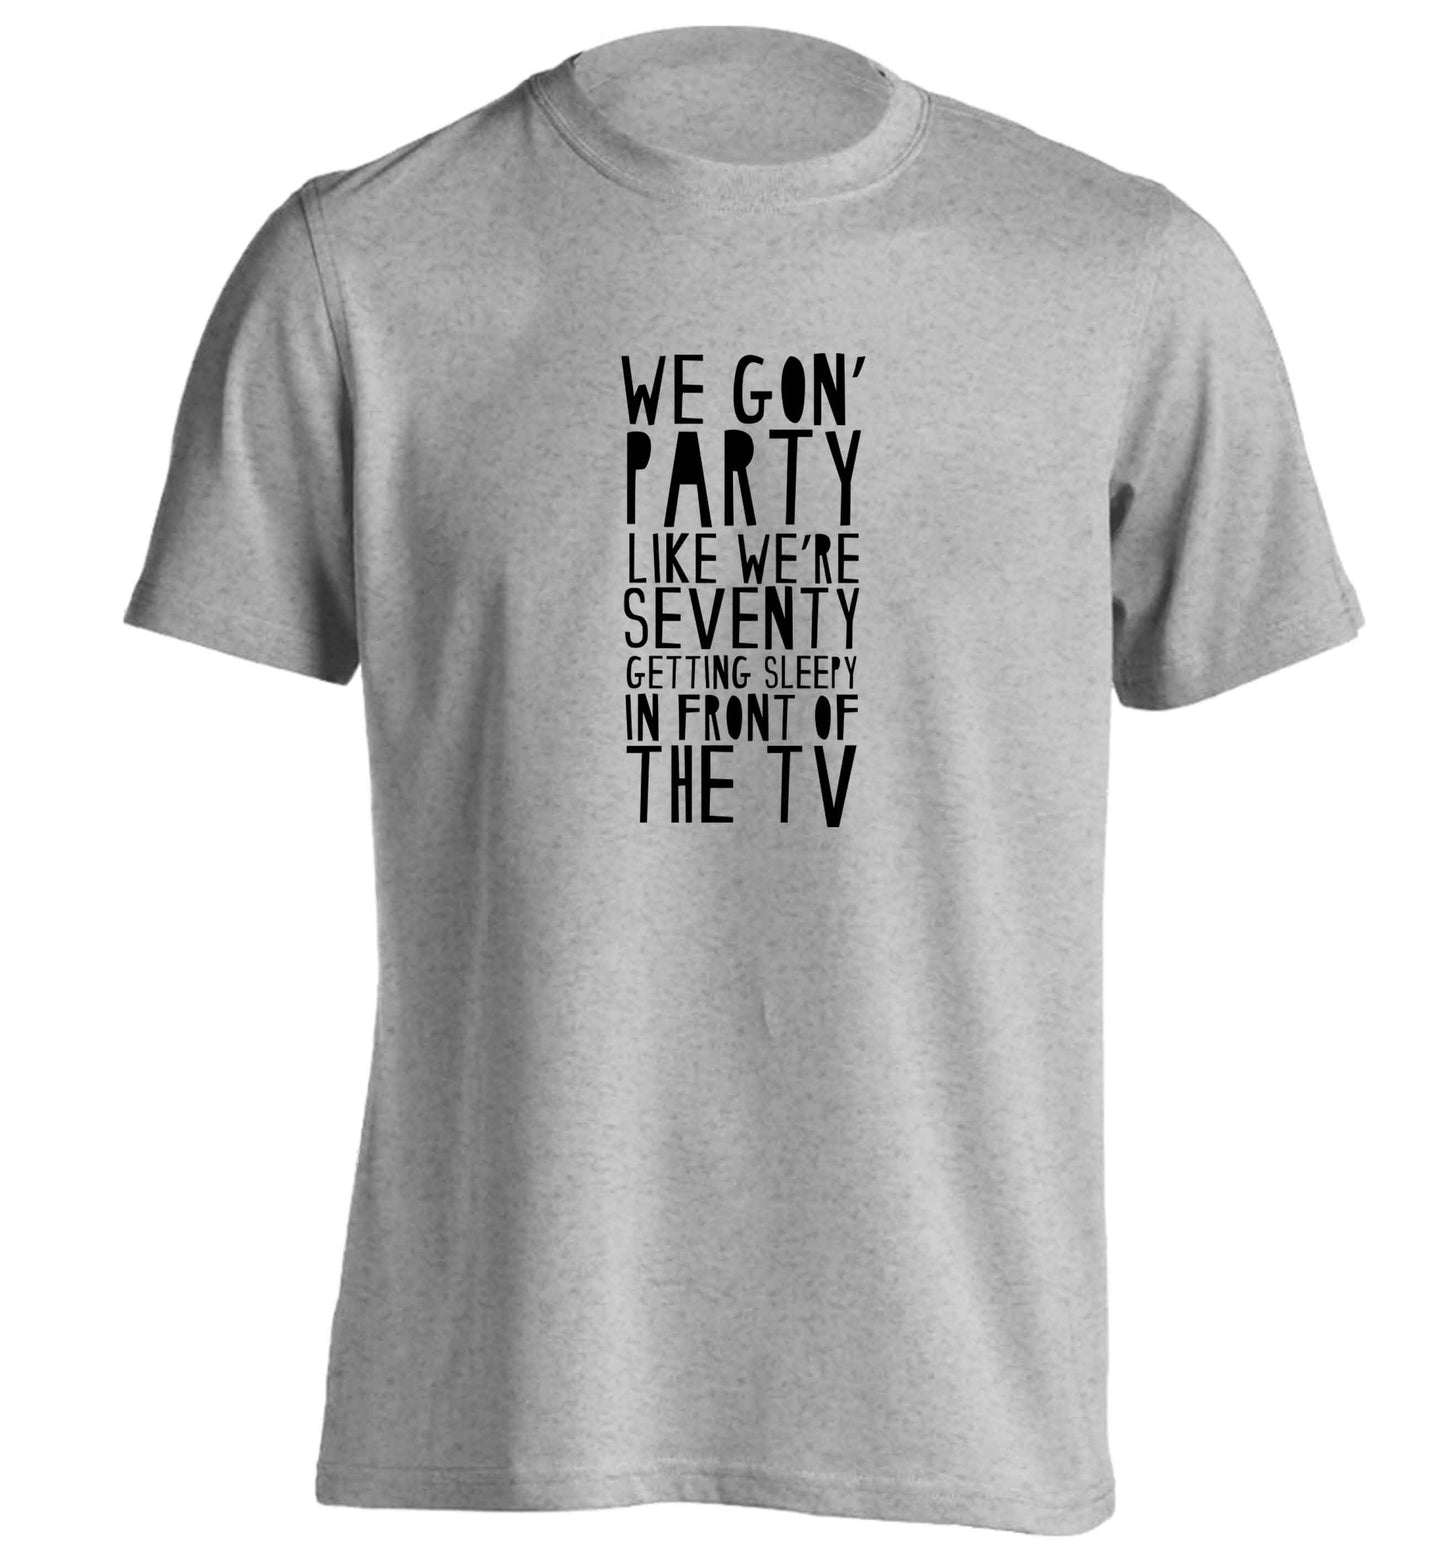 We gon' party like we're seventy getting sleepy in front of the TV adults unisex grey Tshirt 2XL